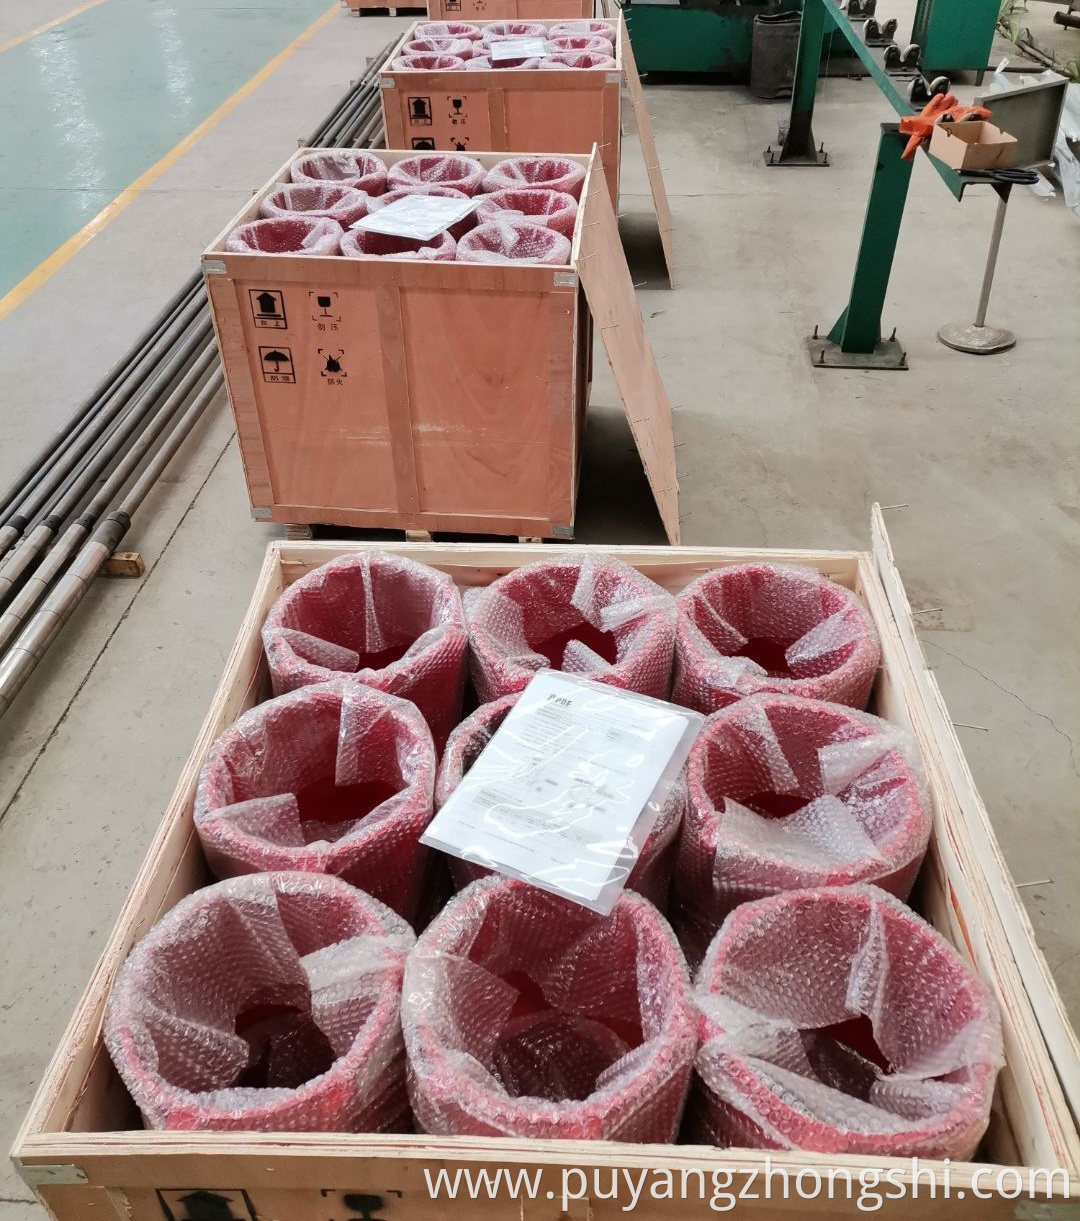 API Casing Hinged Stop Collars used for centralizer